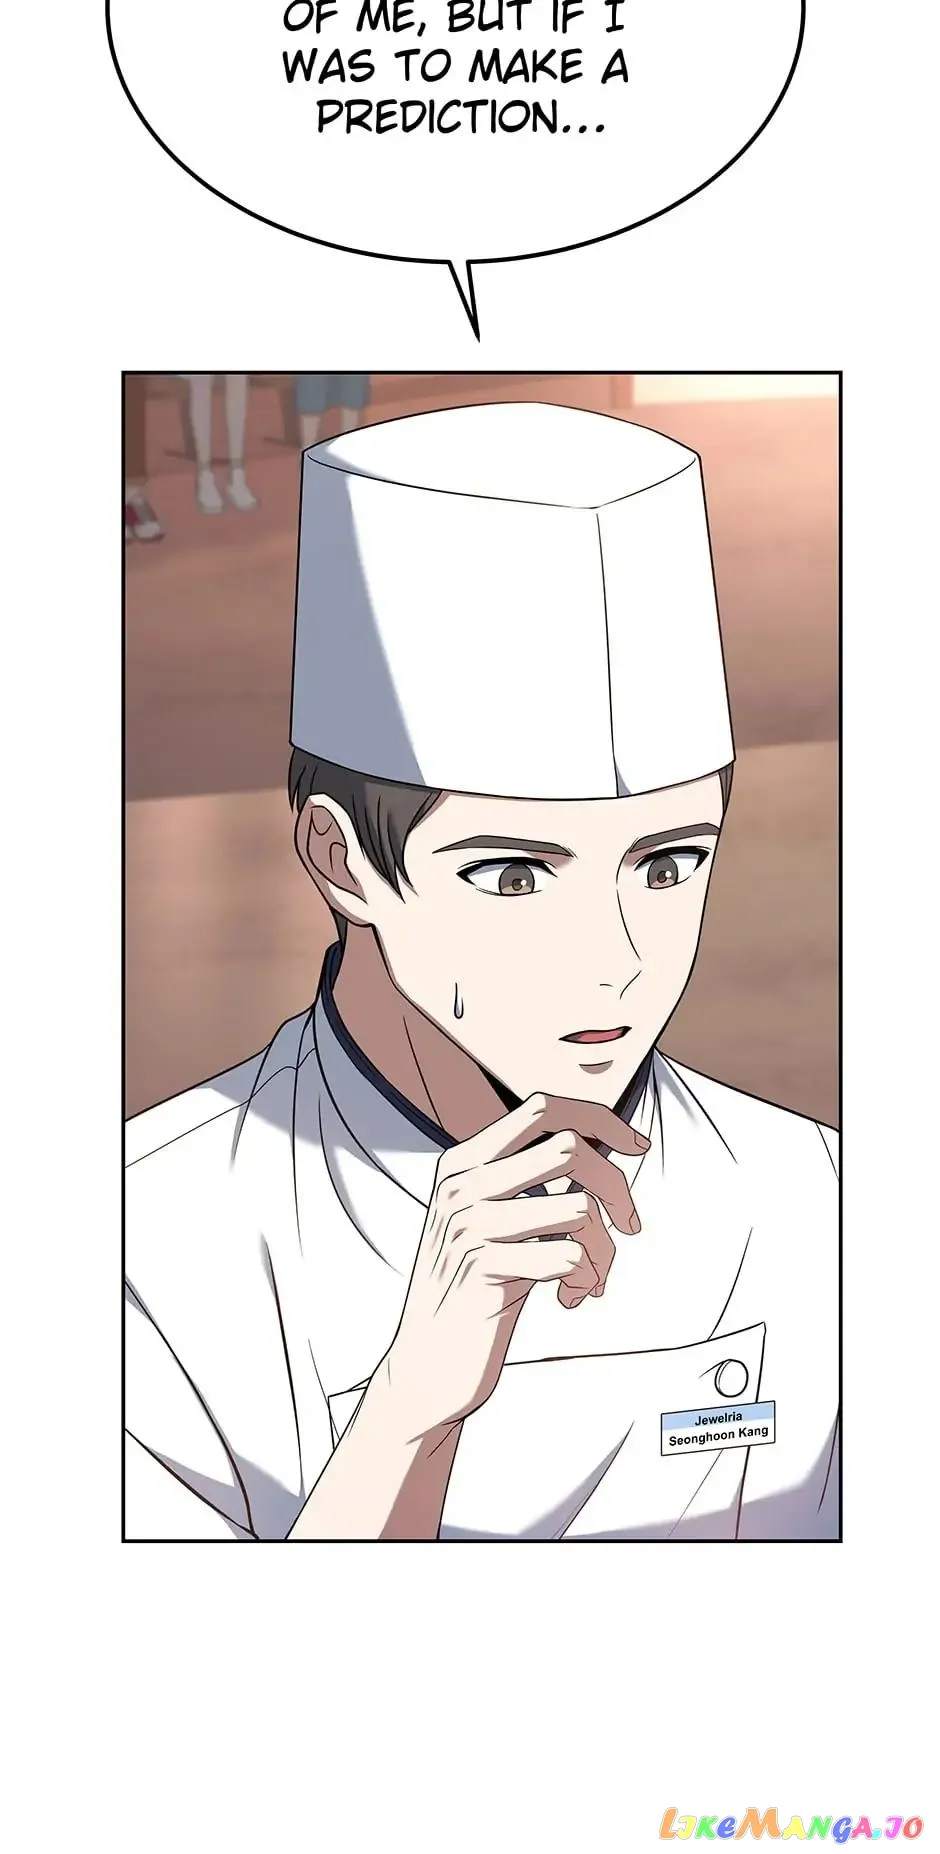 Youngest Chef from the 3rd Rate Hotel chapter 78